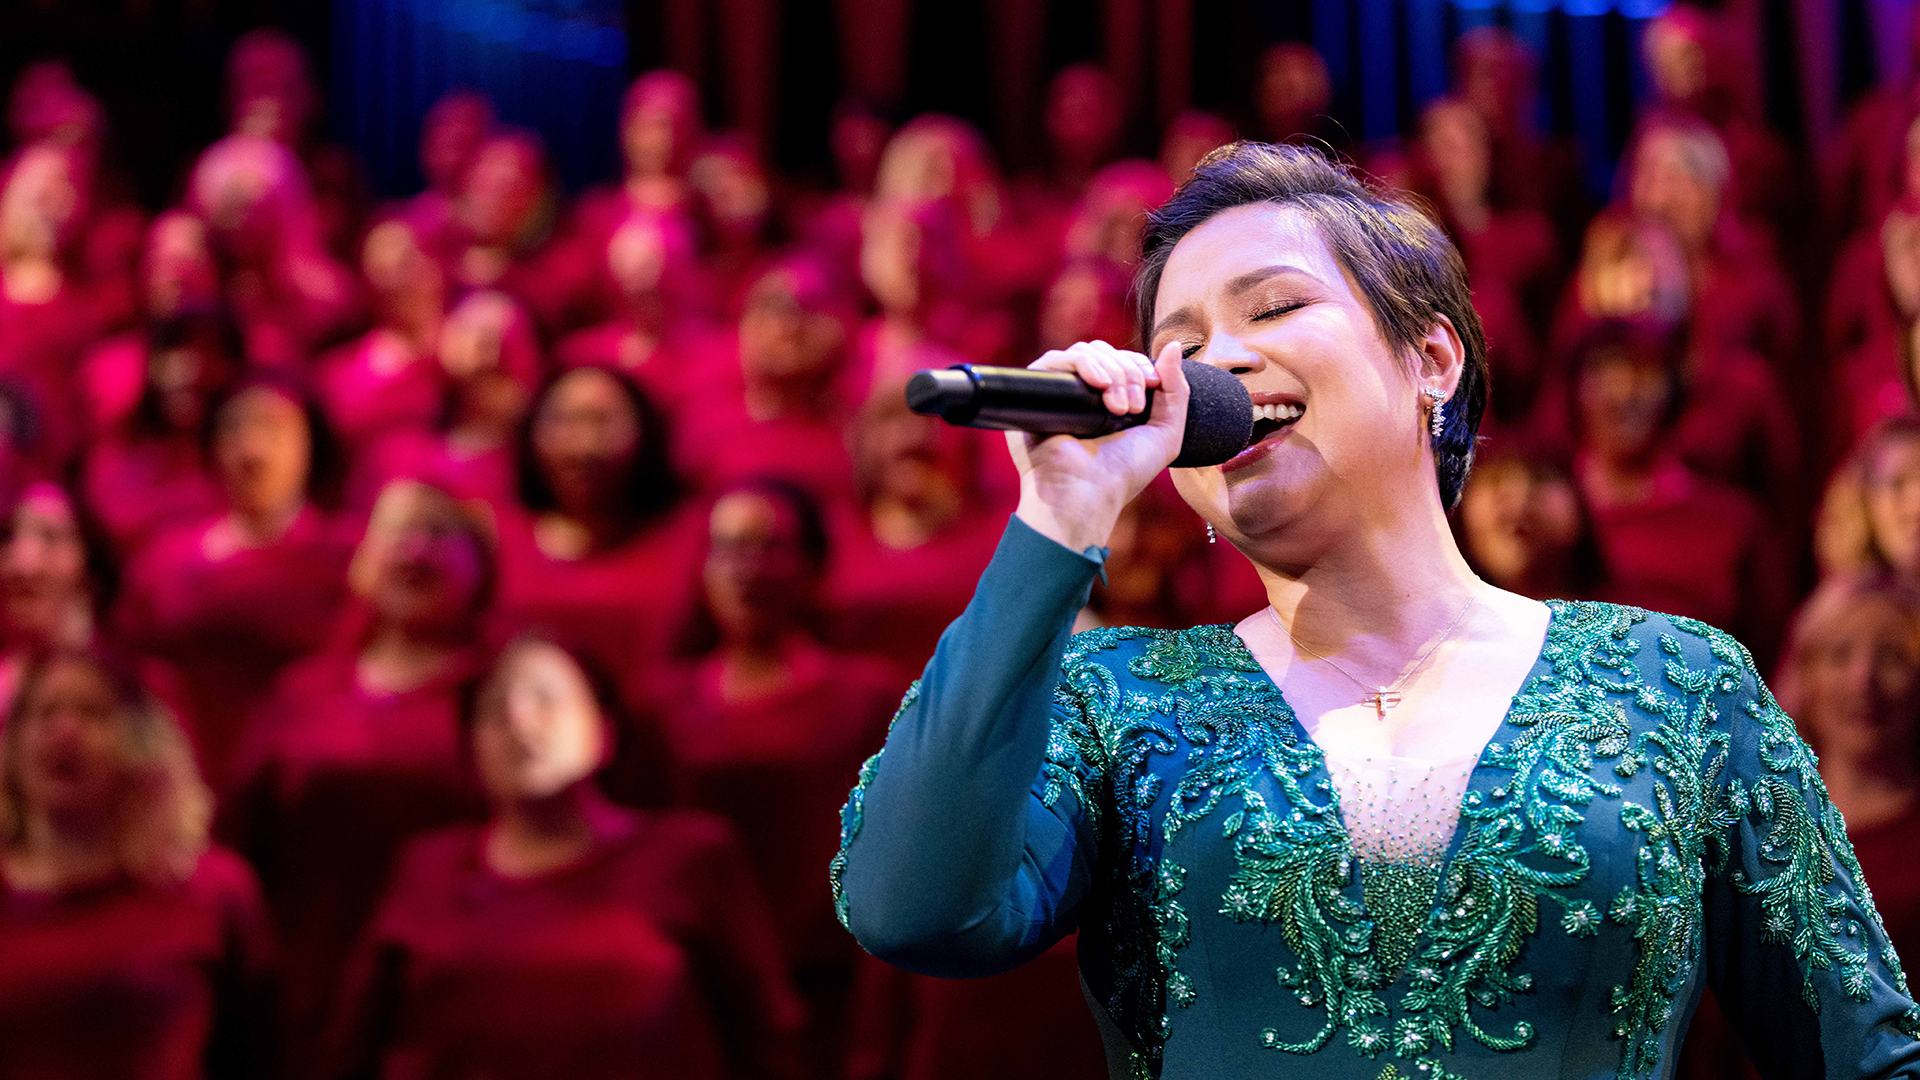 Singer Lea Salonga sings into a microphone while a choir dressed in red sings in the background.